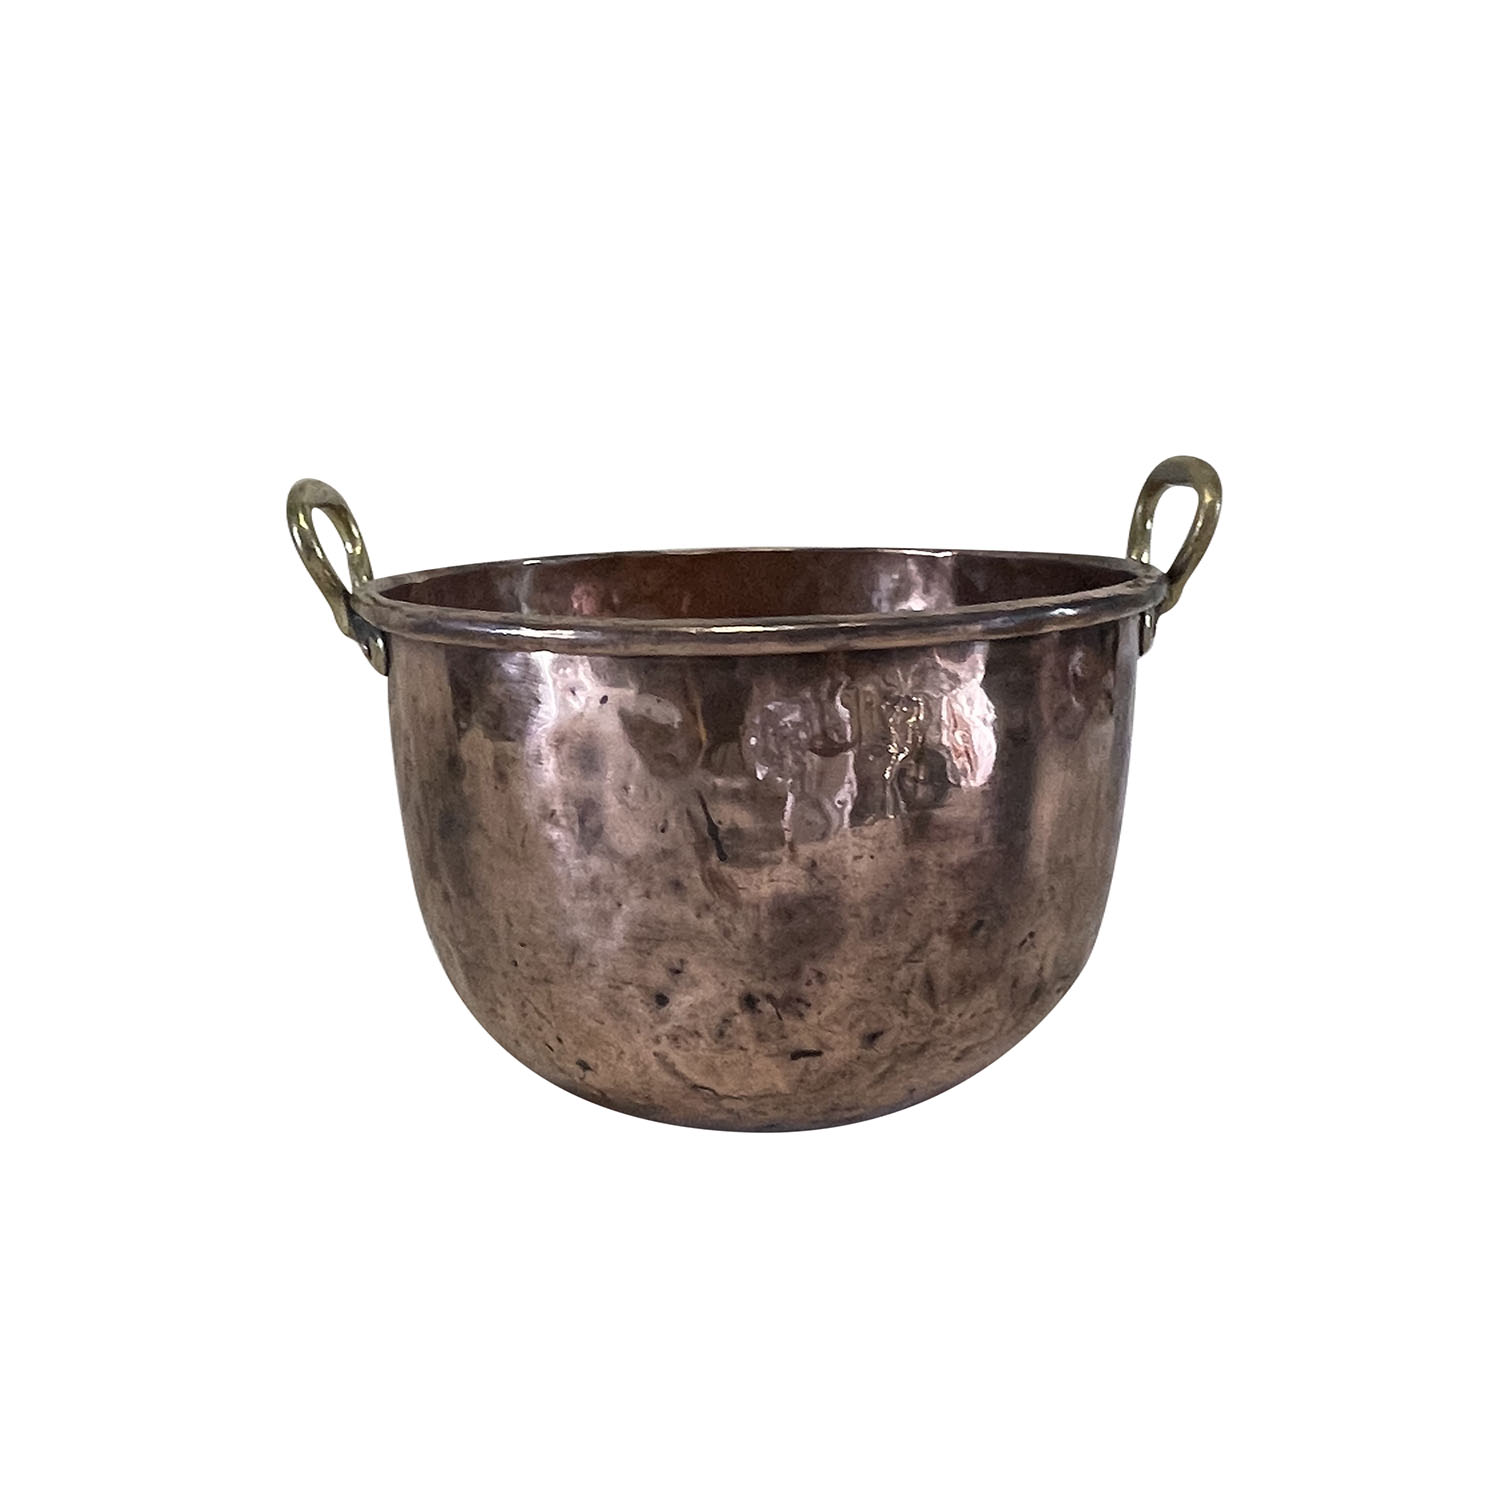 Copper Cauldron from France